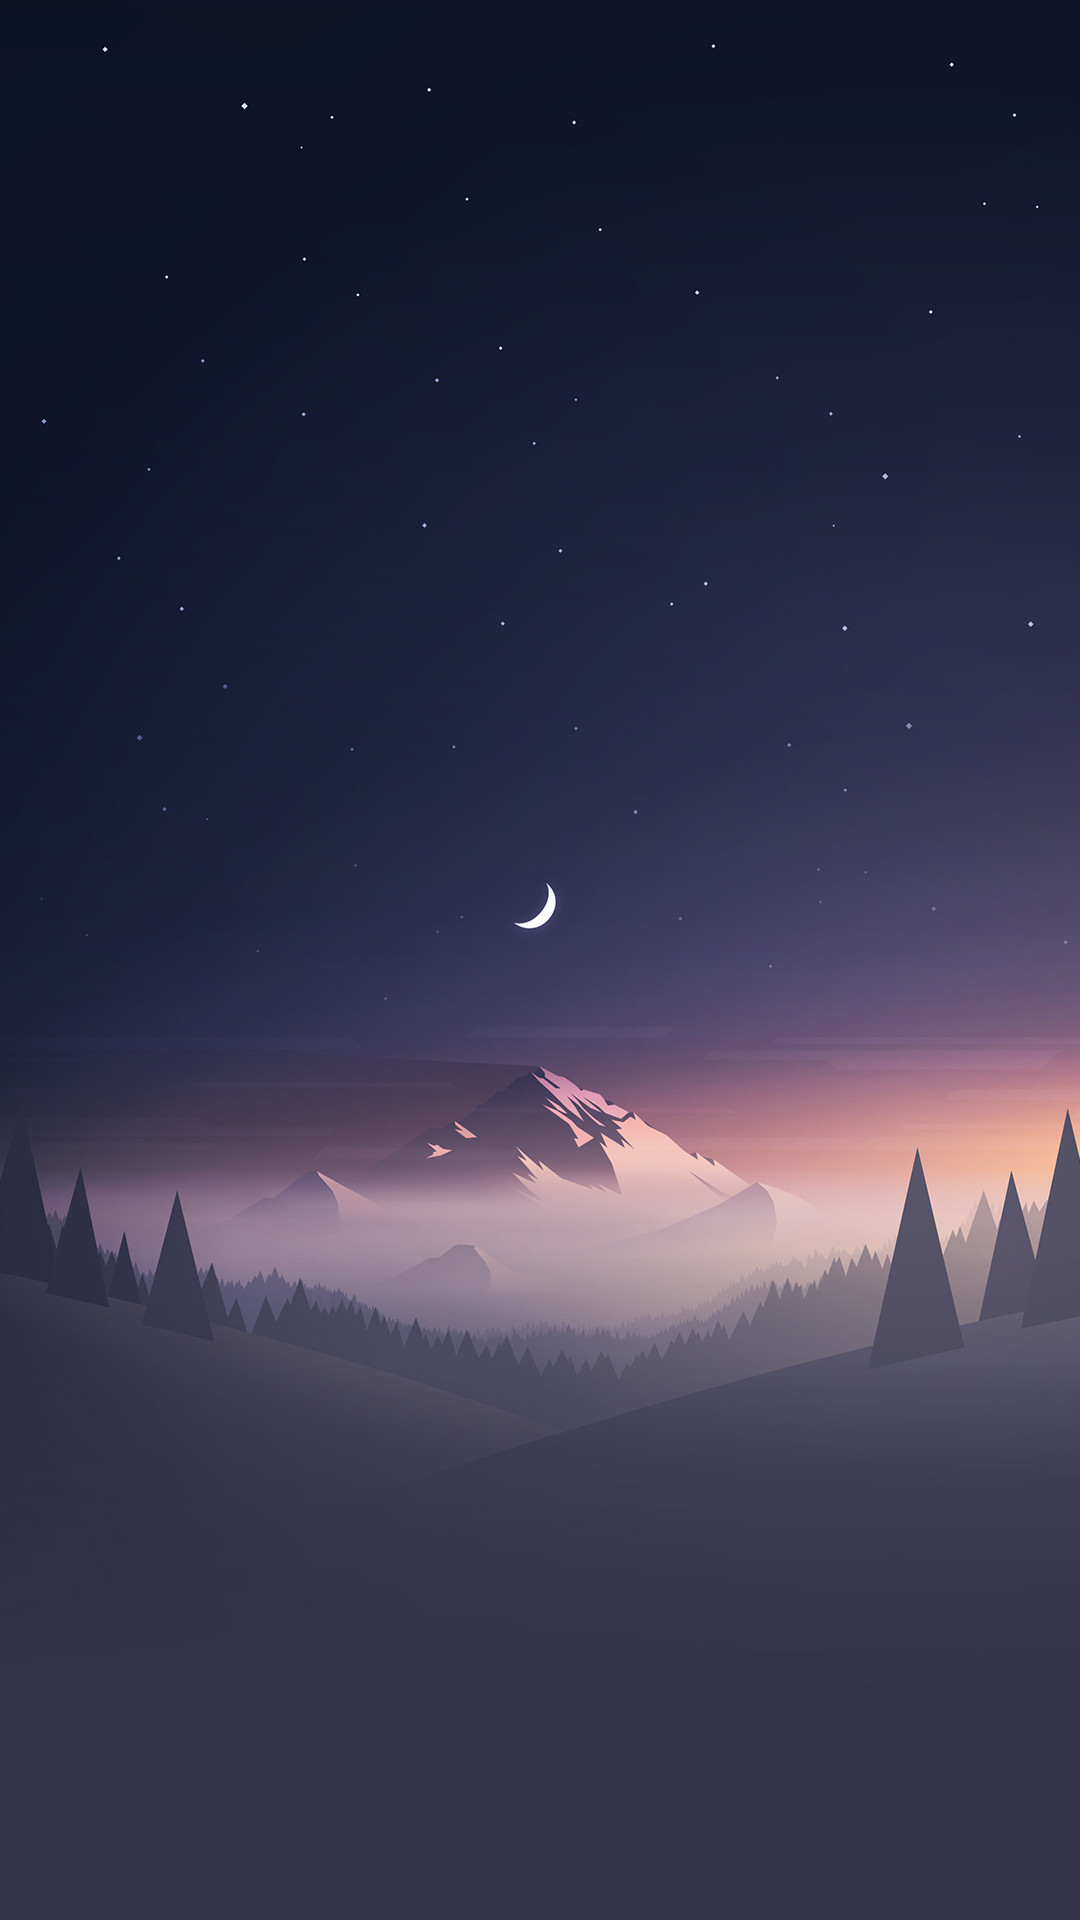 1080x1920 Stars And Moon Winter Mountain Landscape iPhone 6+ HD Wallpaper ...